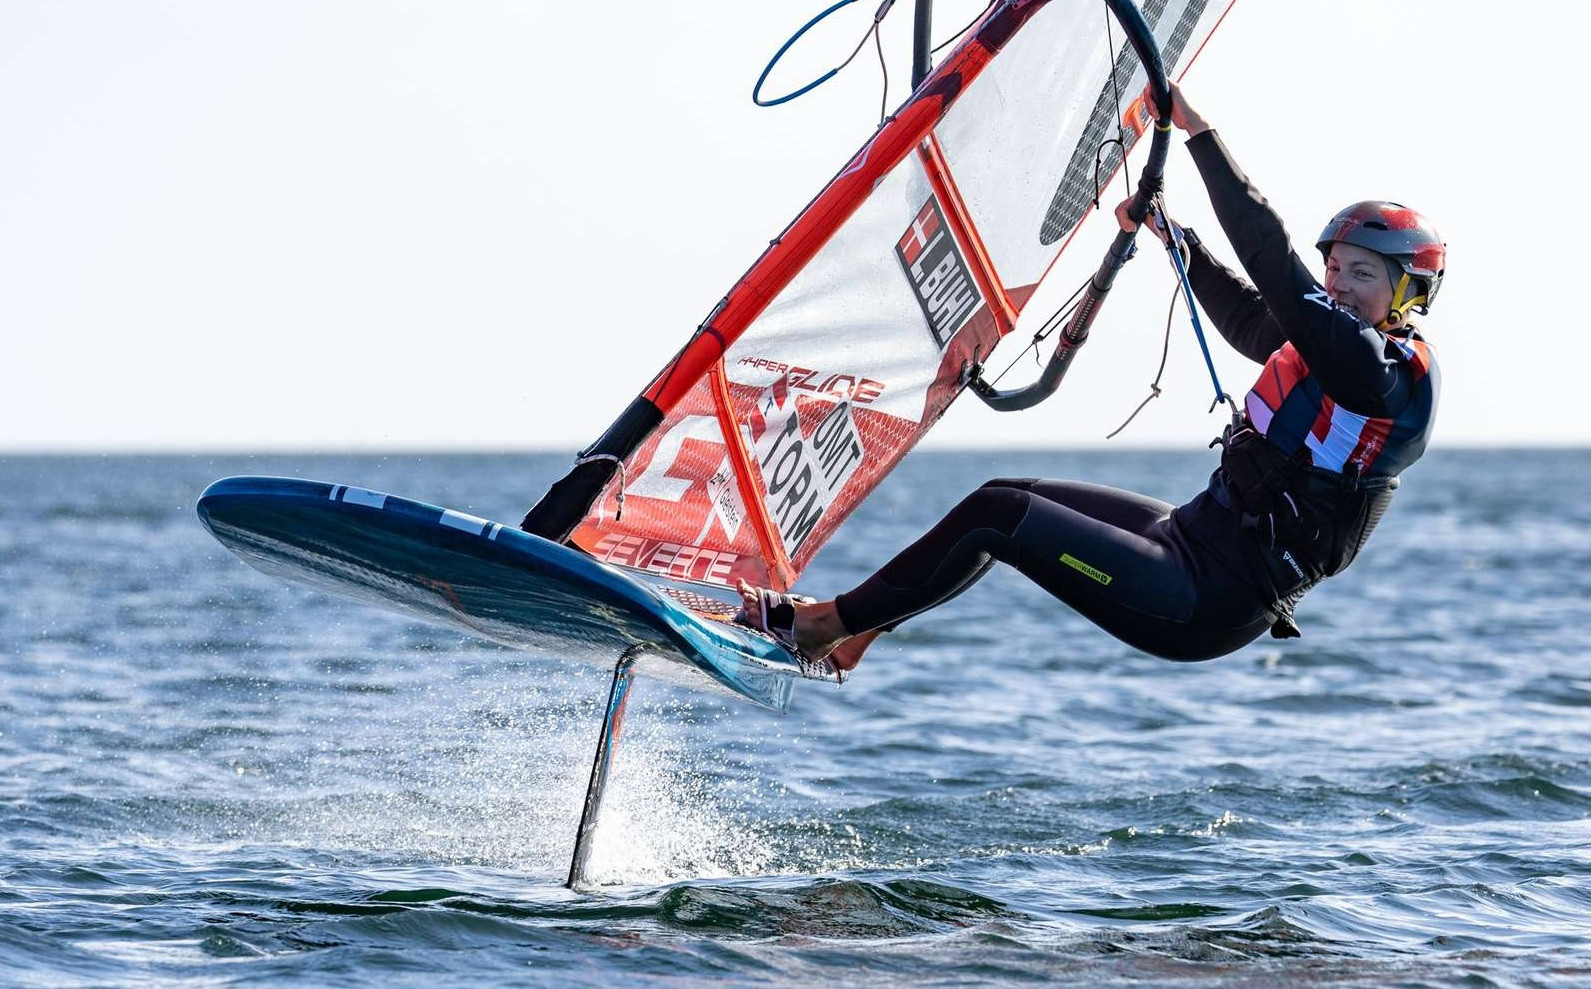 Two-time Olympian Lærke Buhl-Hansen has switched from RS:X to IQFoil as she bids to qualify for Paris 2024 ©Danish Sailing Association